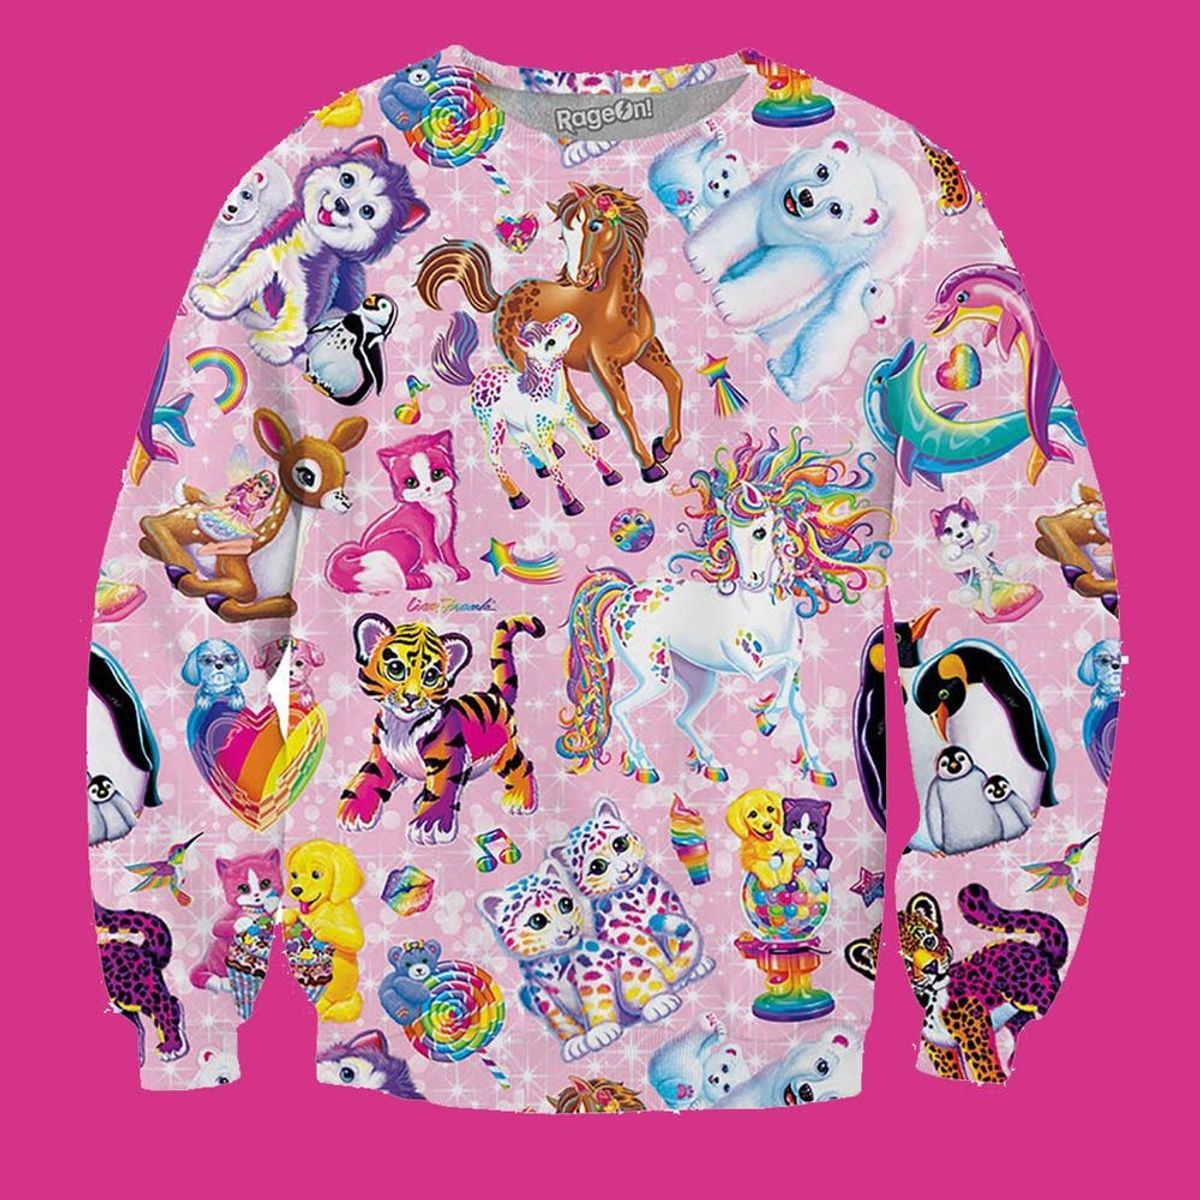 This Lisa Frank Apparel Collection Is Your Inner ‘90s Kid Dream Come True